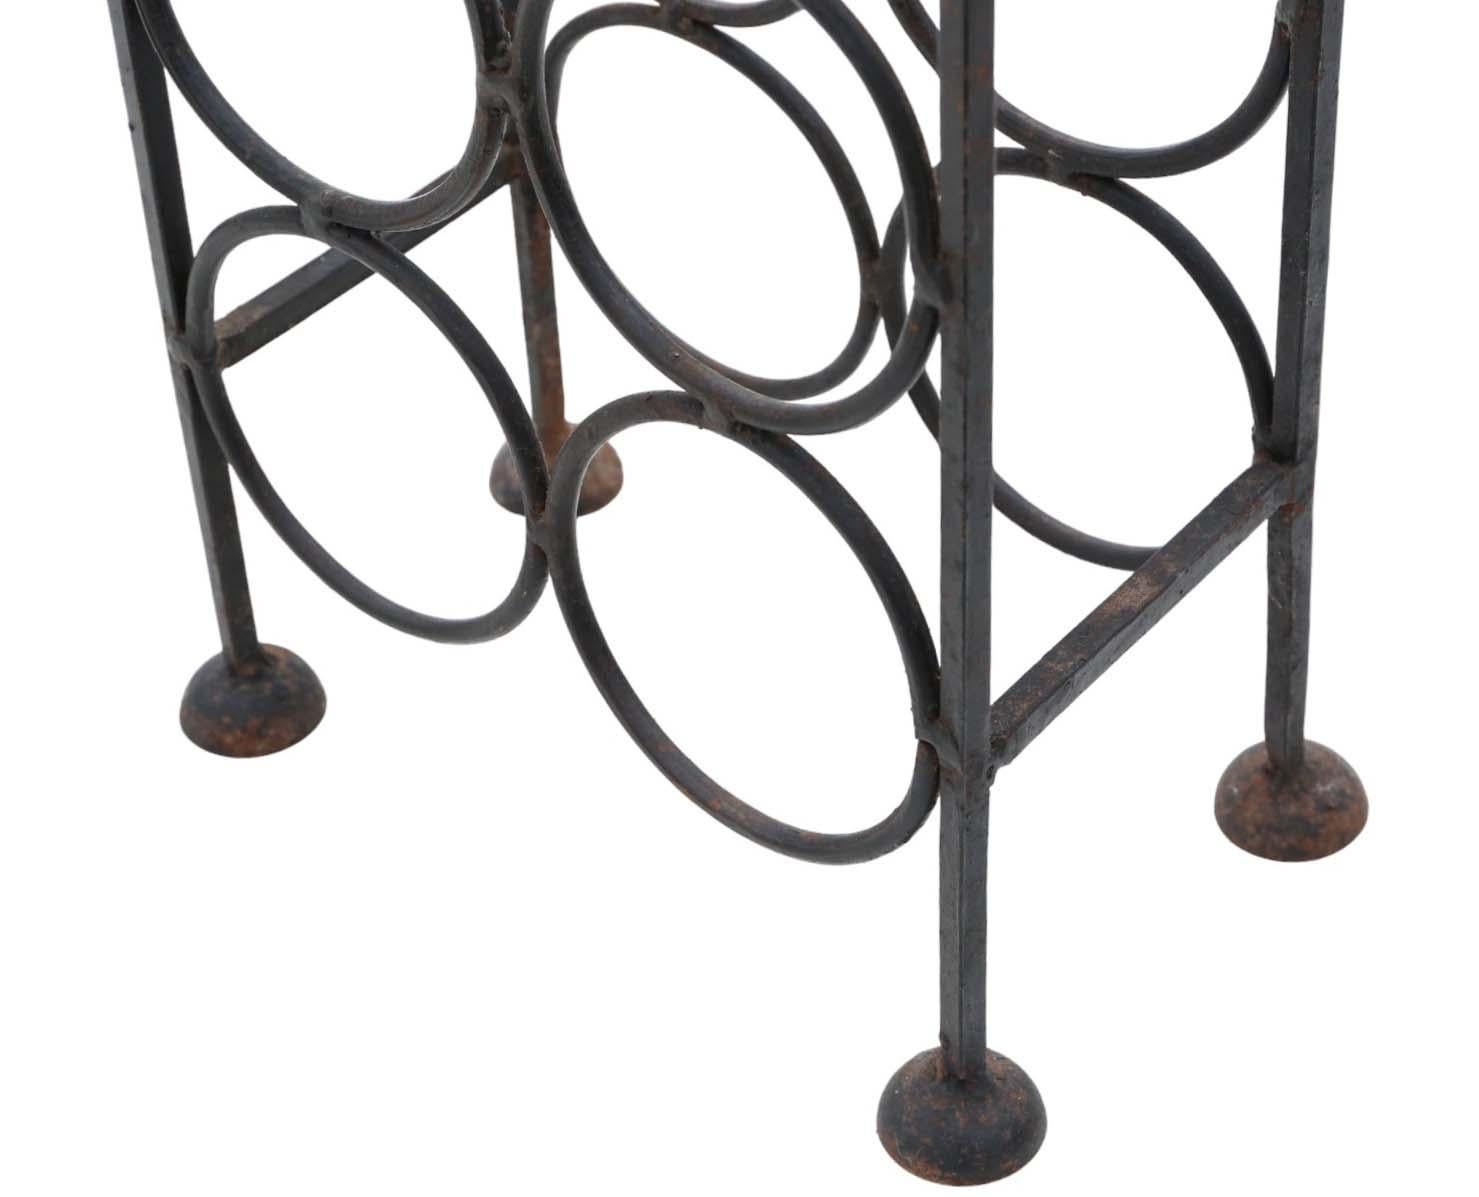 Iron Antique heavy wrought iron wine rack C1920 or earlier 16 bottles stand